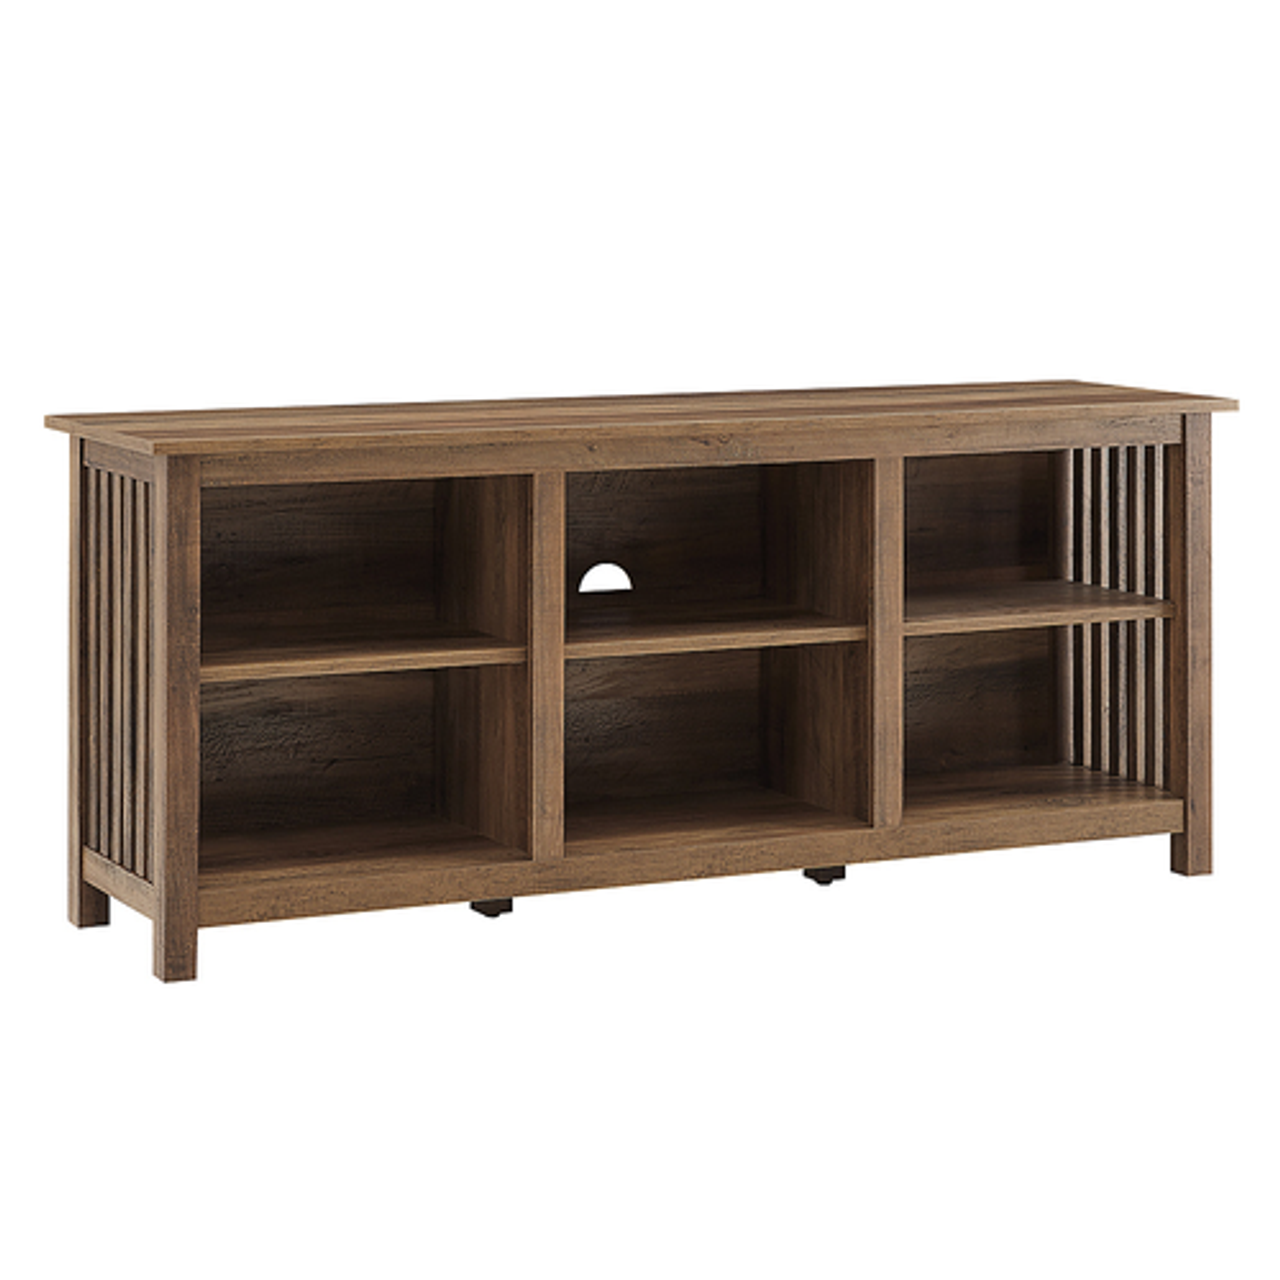 Walker Edison - Mission-Style 6-Cubby TV Stand for TVs up to 65” - Rustic Oak